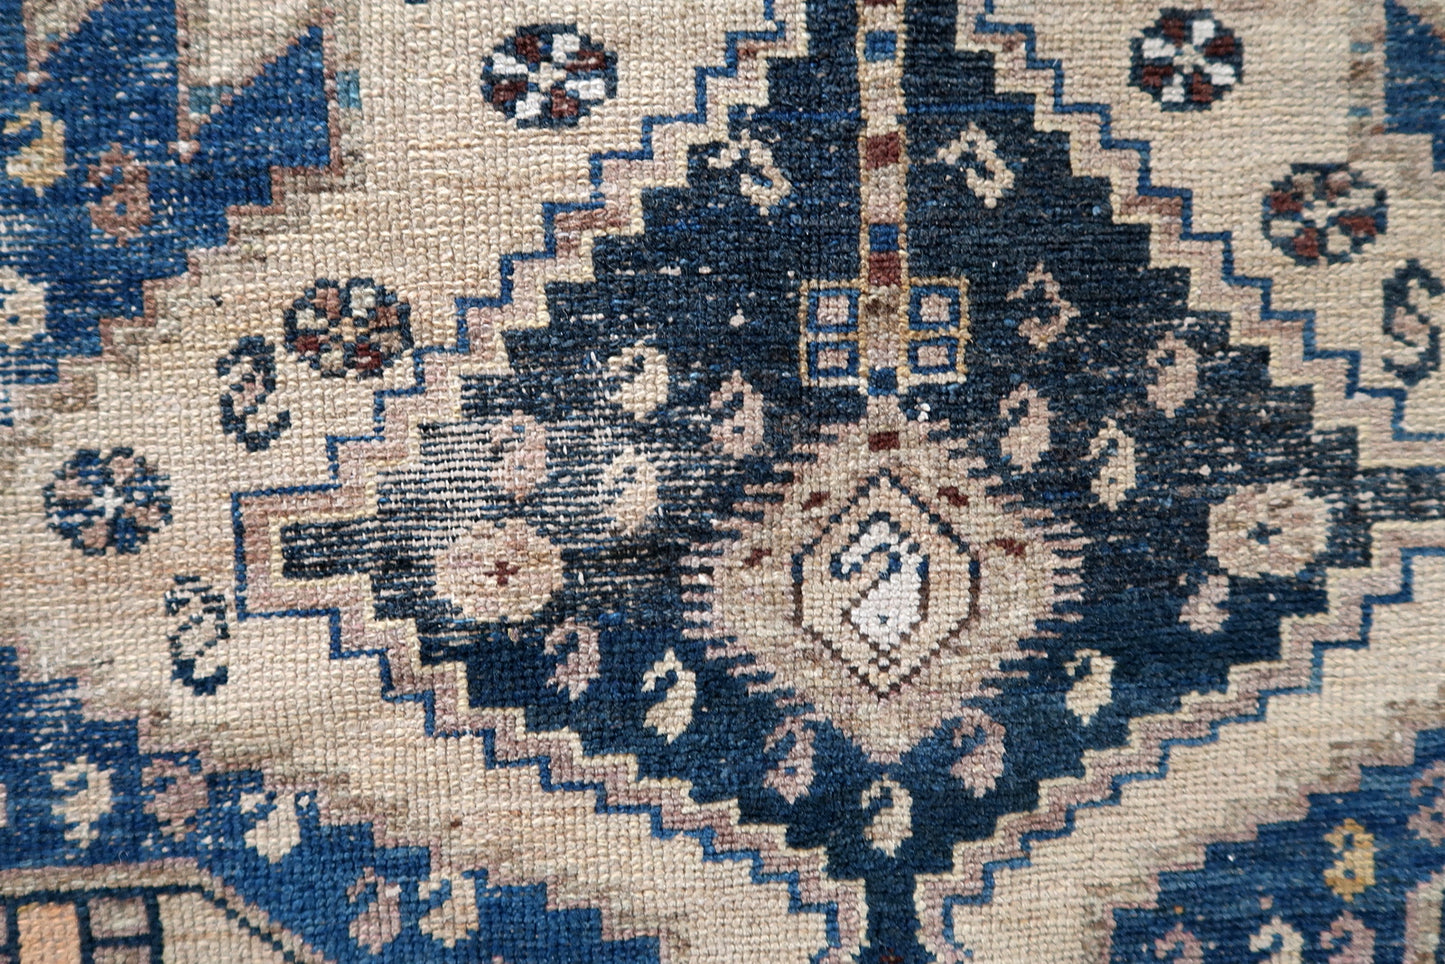 Close-up of compact size on Handmade Antique Caucasian Shirvan Rug - Detailed view highlighting the compact yet impactful size of the rug.